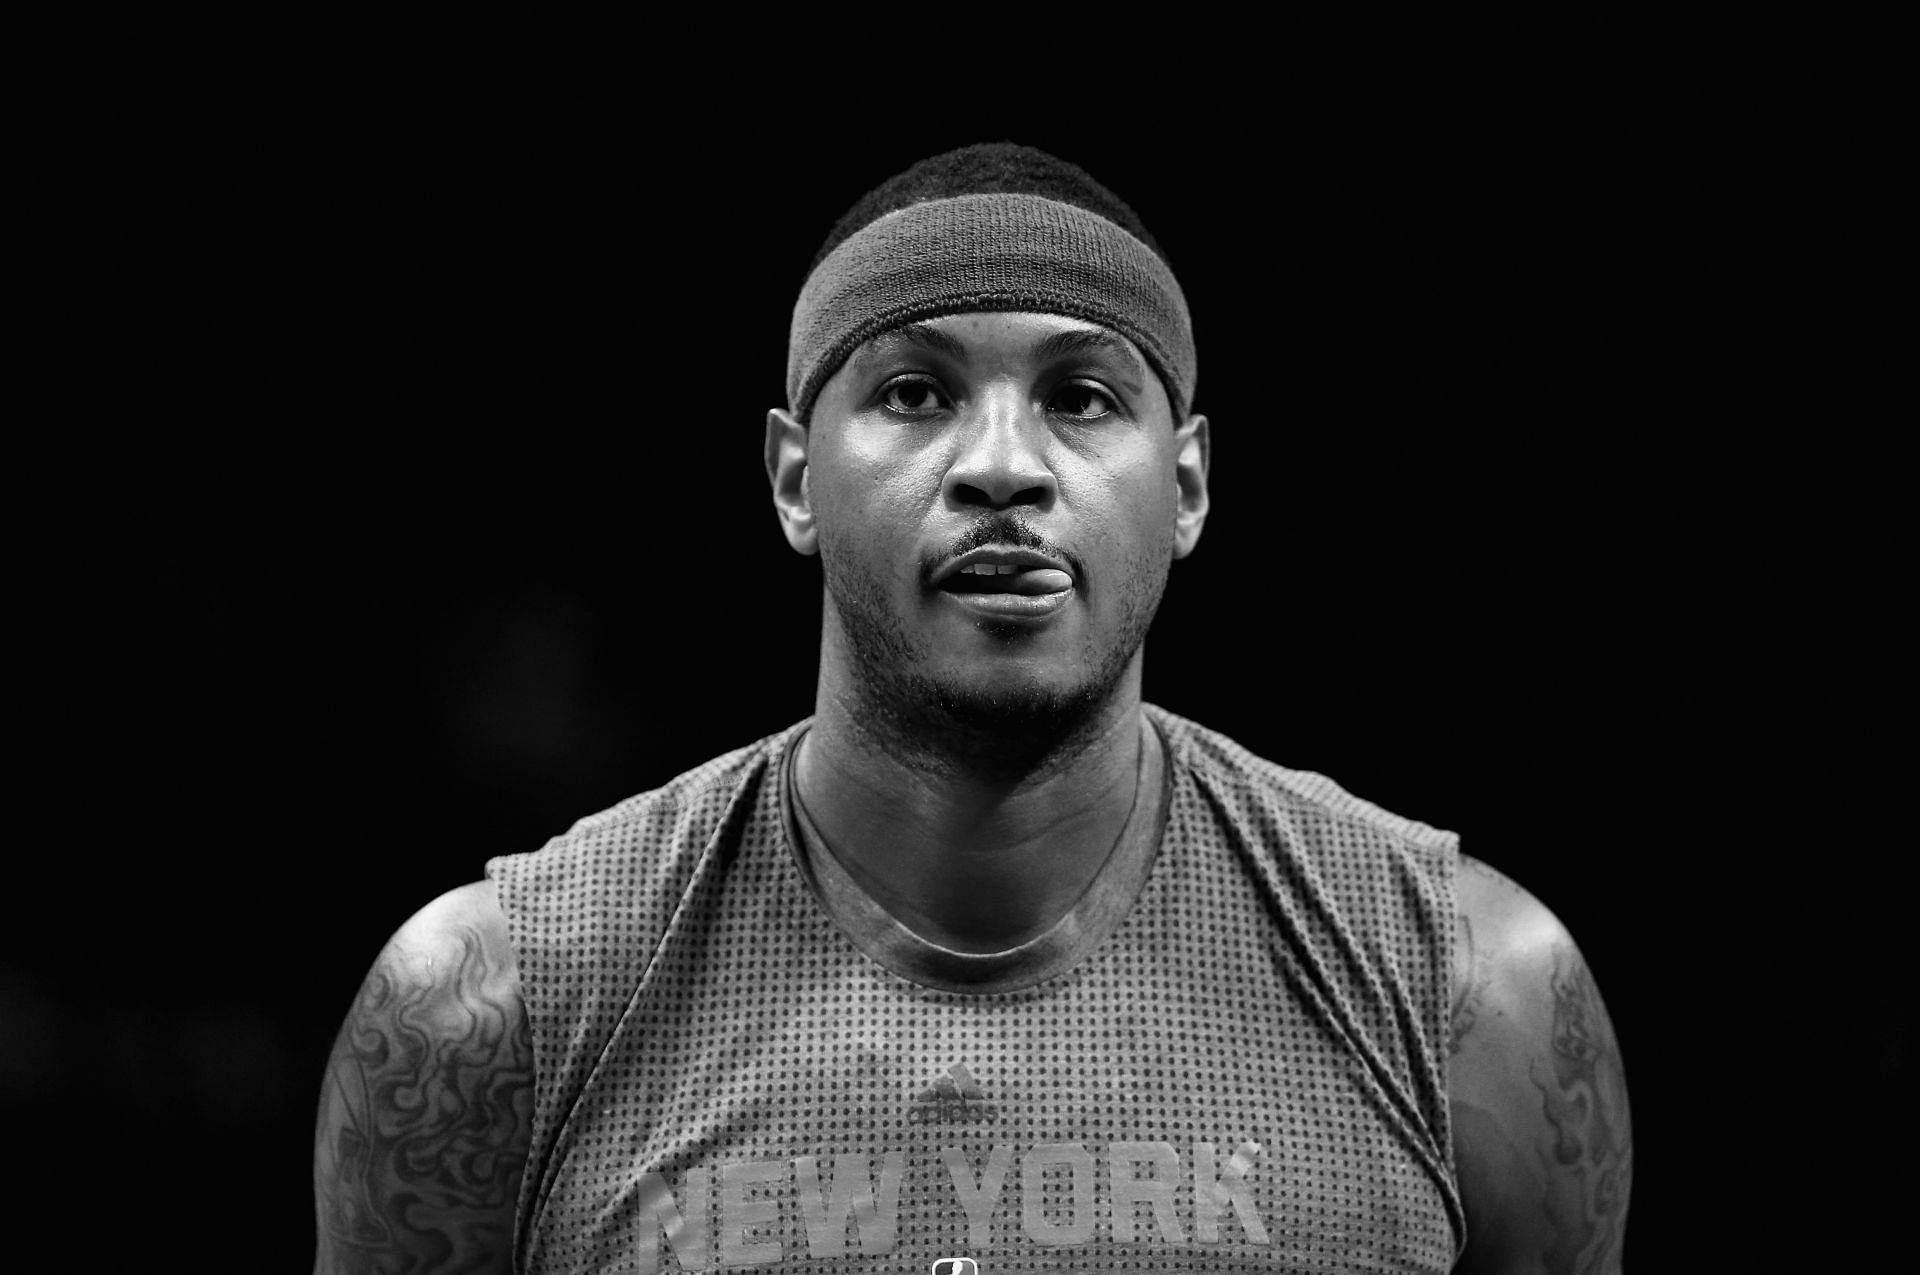 Carmelo Anthony during his time with the New York Knicks